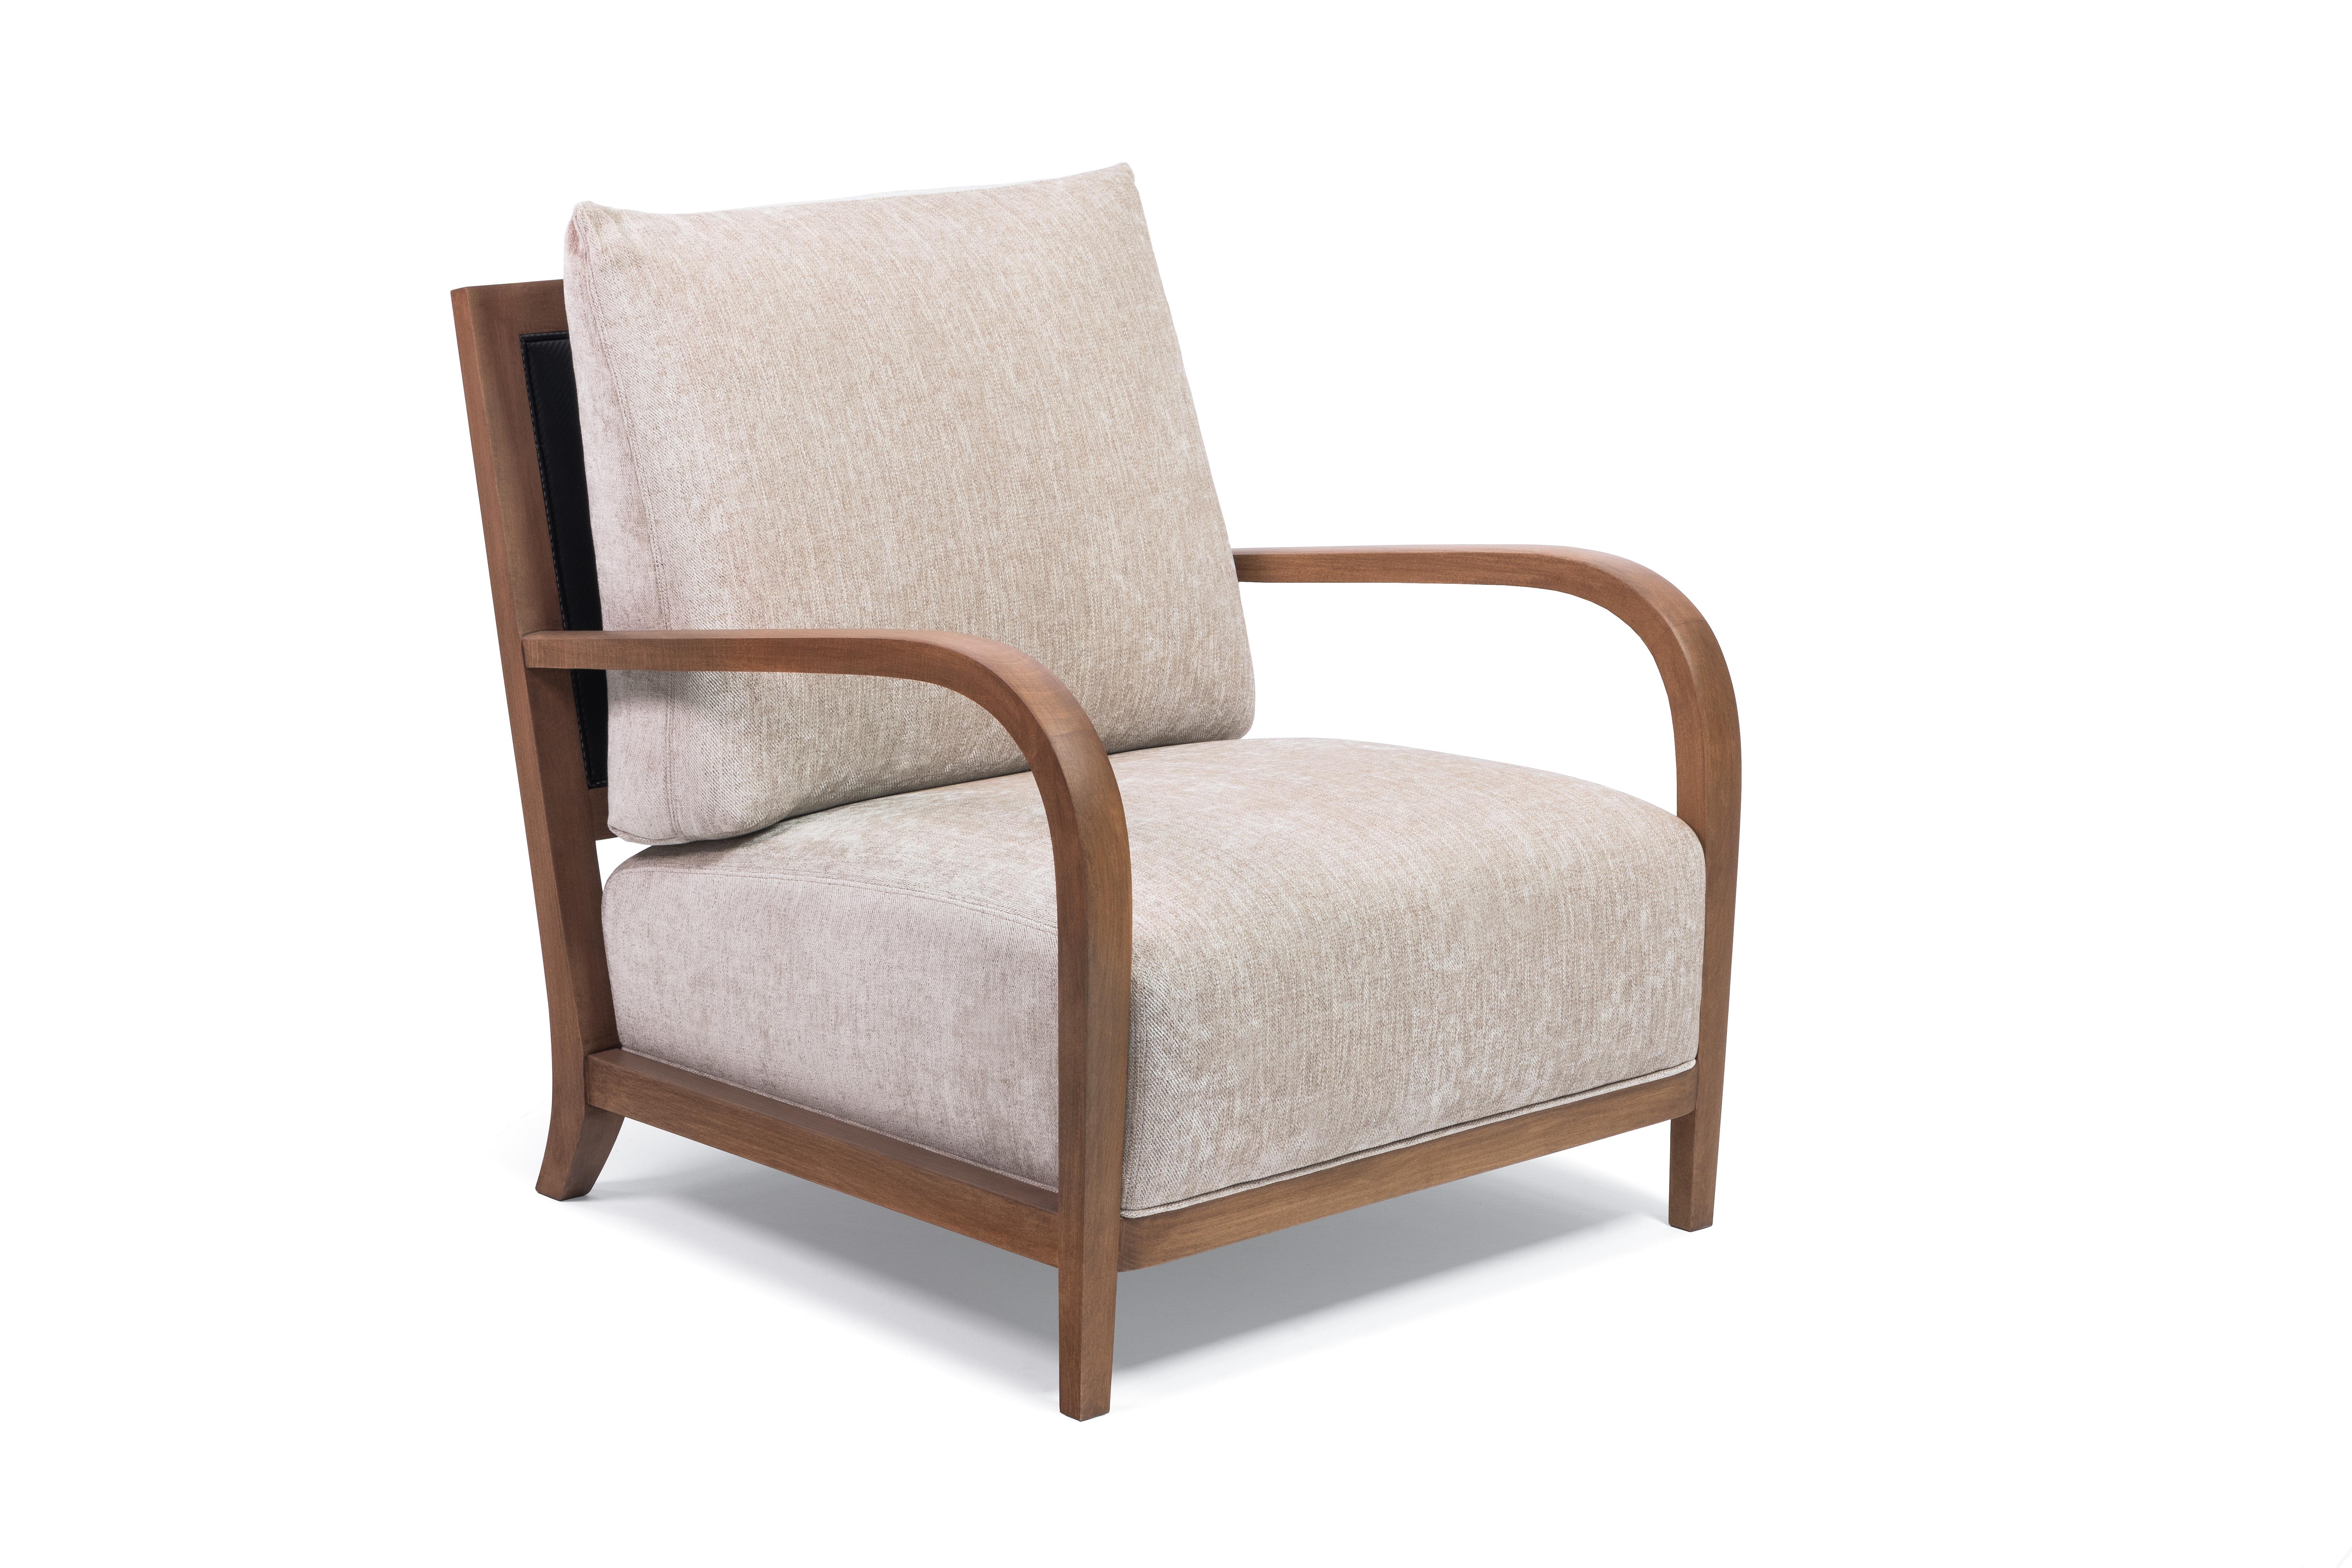 A modern design armchair which features remarkably elegant, yet simple and clean lines. Its exceptional comfort makes DISTINTA the perfect choice for your living room. 
The frame is available in polished beech wood, completed by a cushion for the